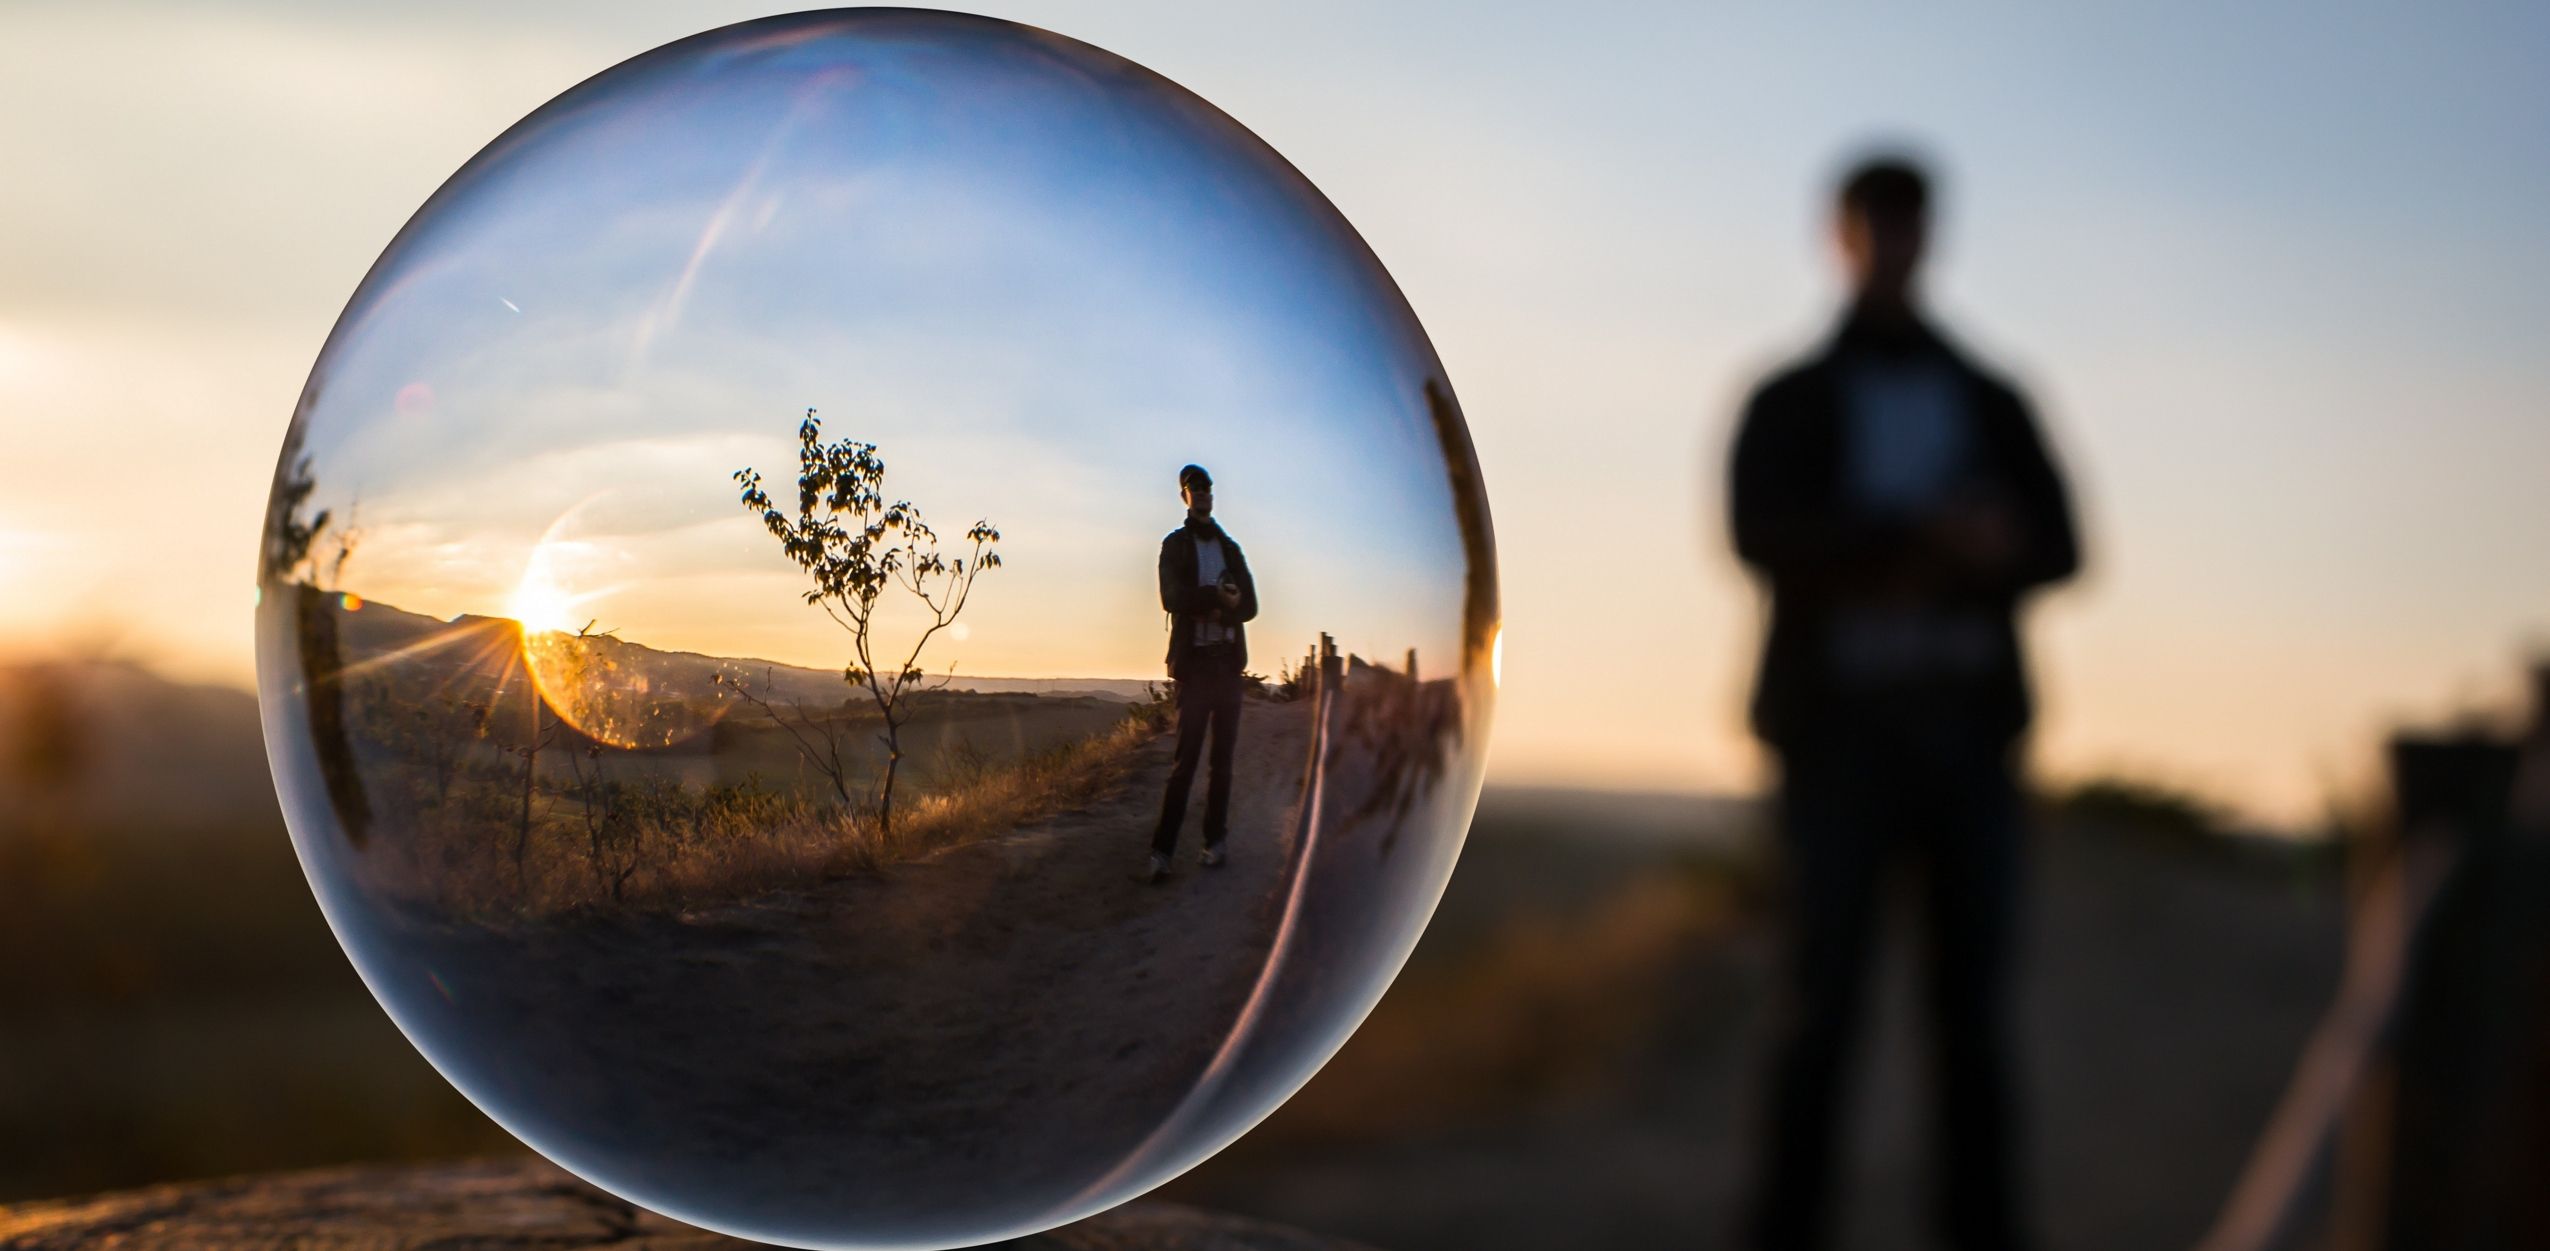 A sunset horizon and a person standing fairly close by, all reflected through a bubble up-close.